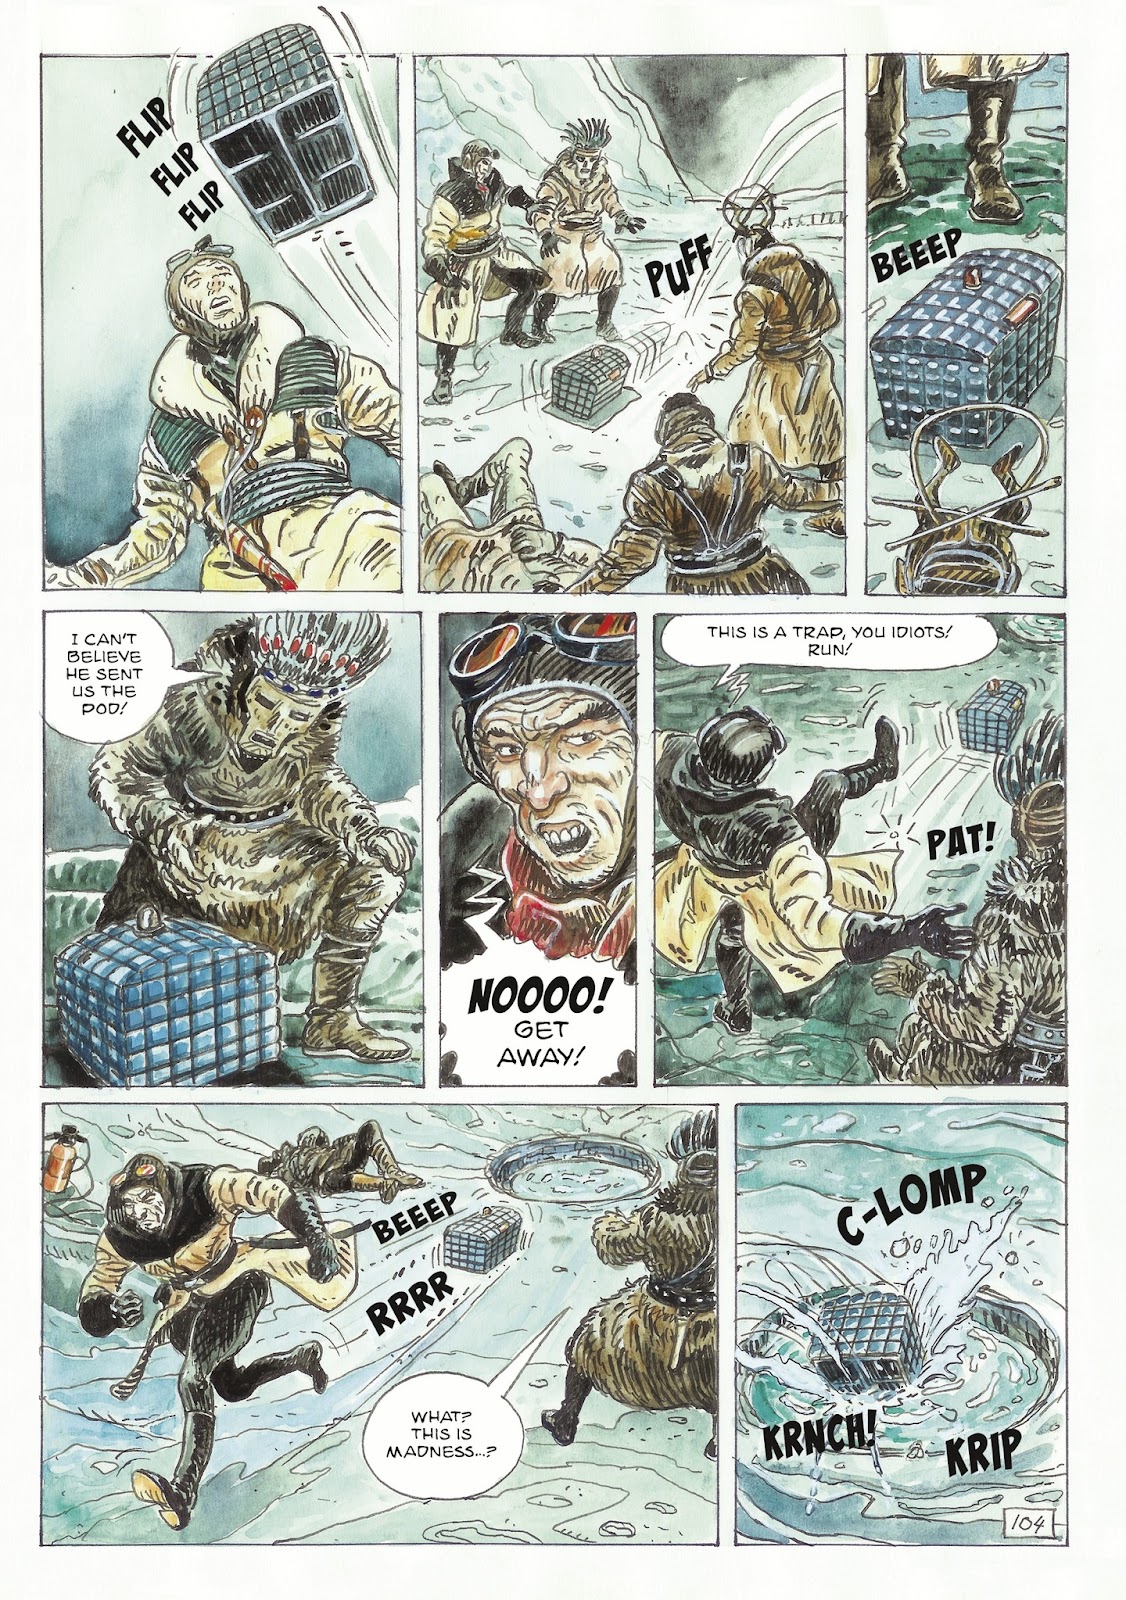 The Man With the Bear issue 2 - Page 50